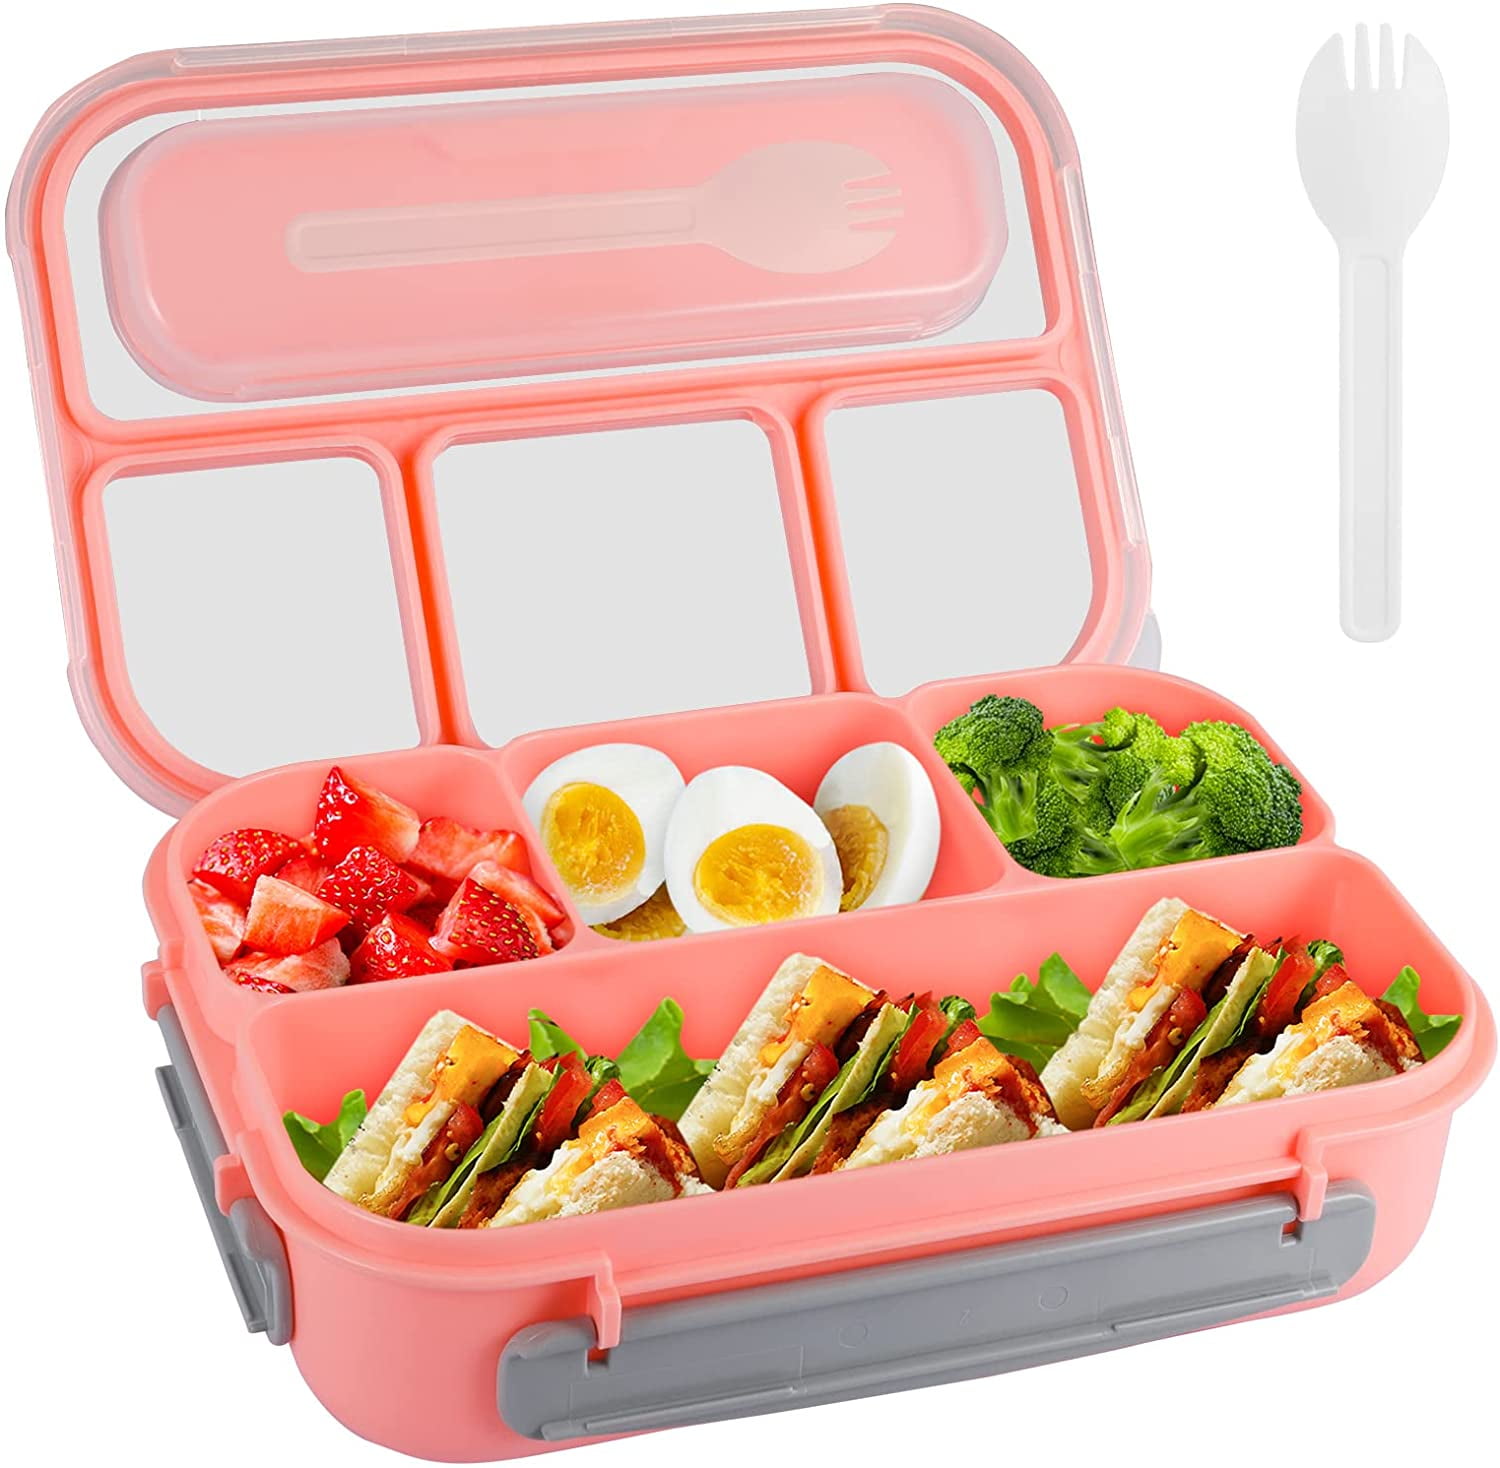 Pink Bento Box with Band and Utensils – Izzy and Luke